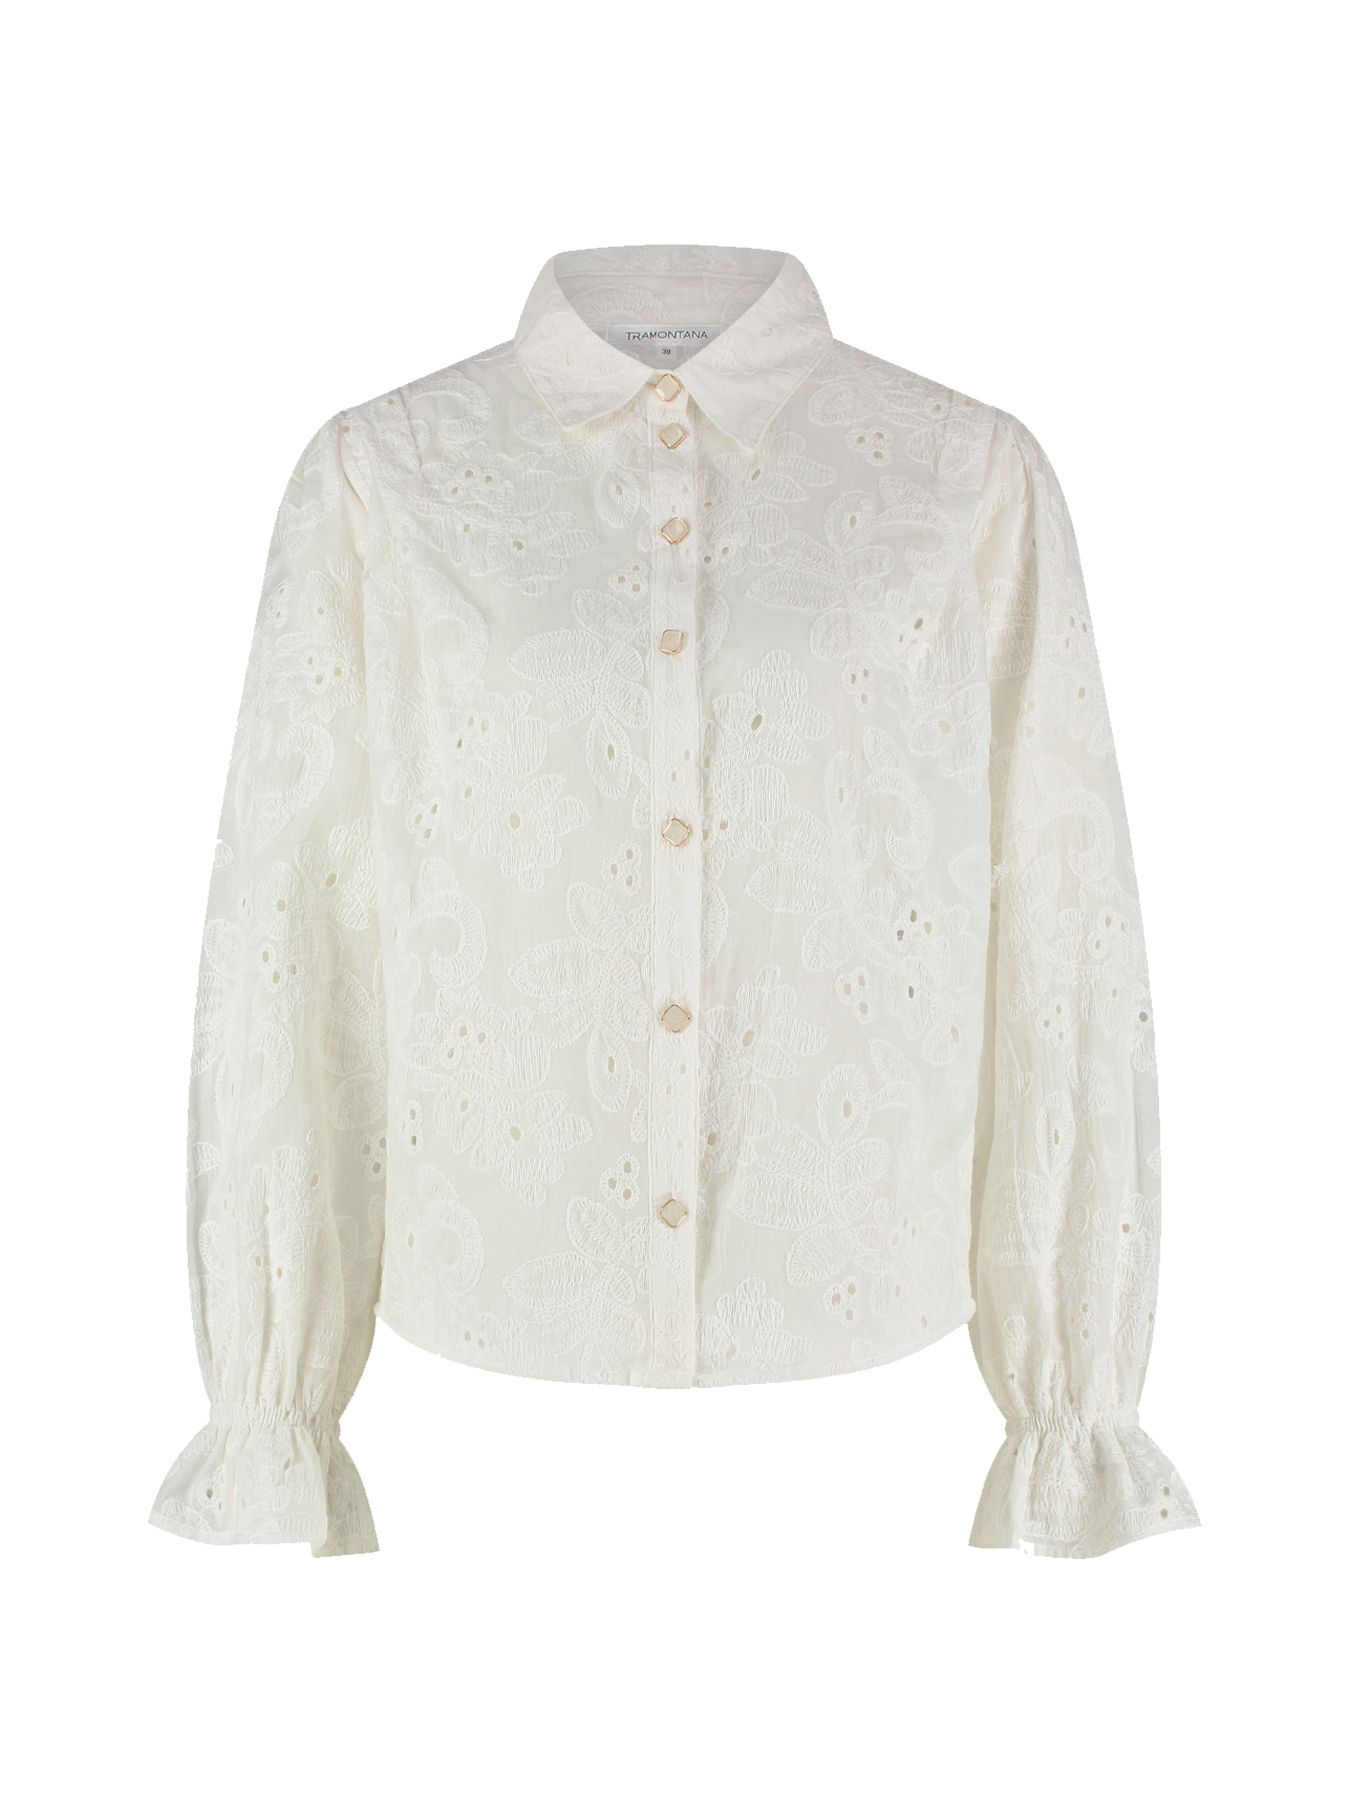 Tramontana Blouse Brodery Off White 001100 2900140835044